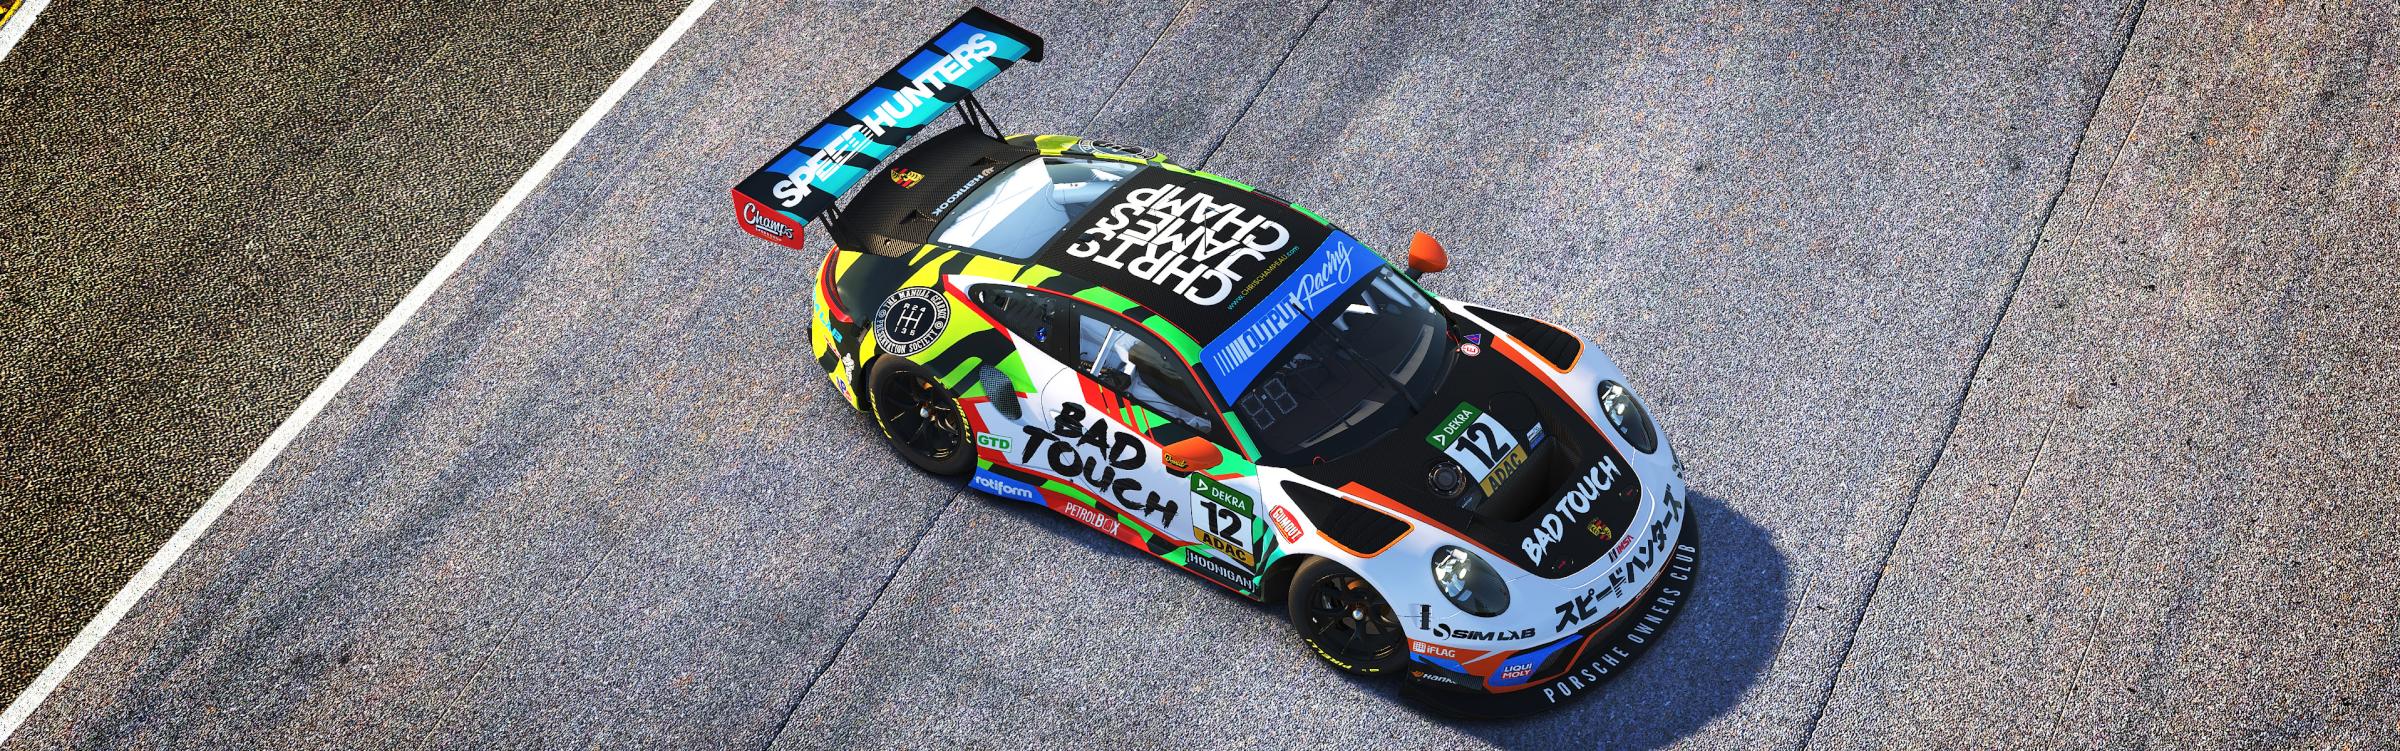 Preview of Team Bad Touch Porsche 911 GT3 R by Chris Champeau